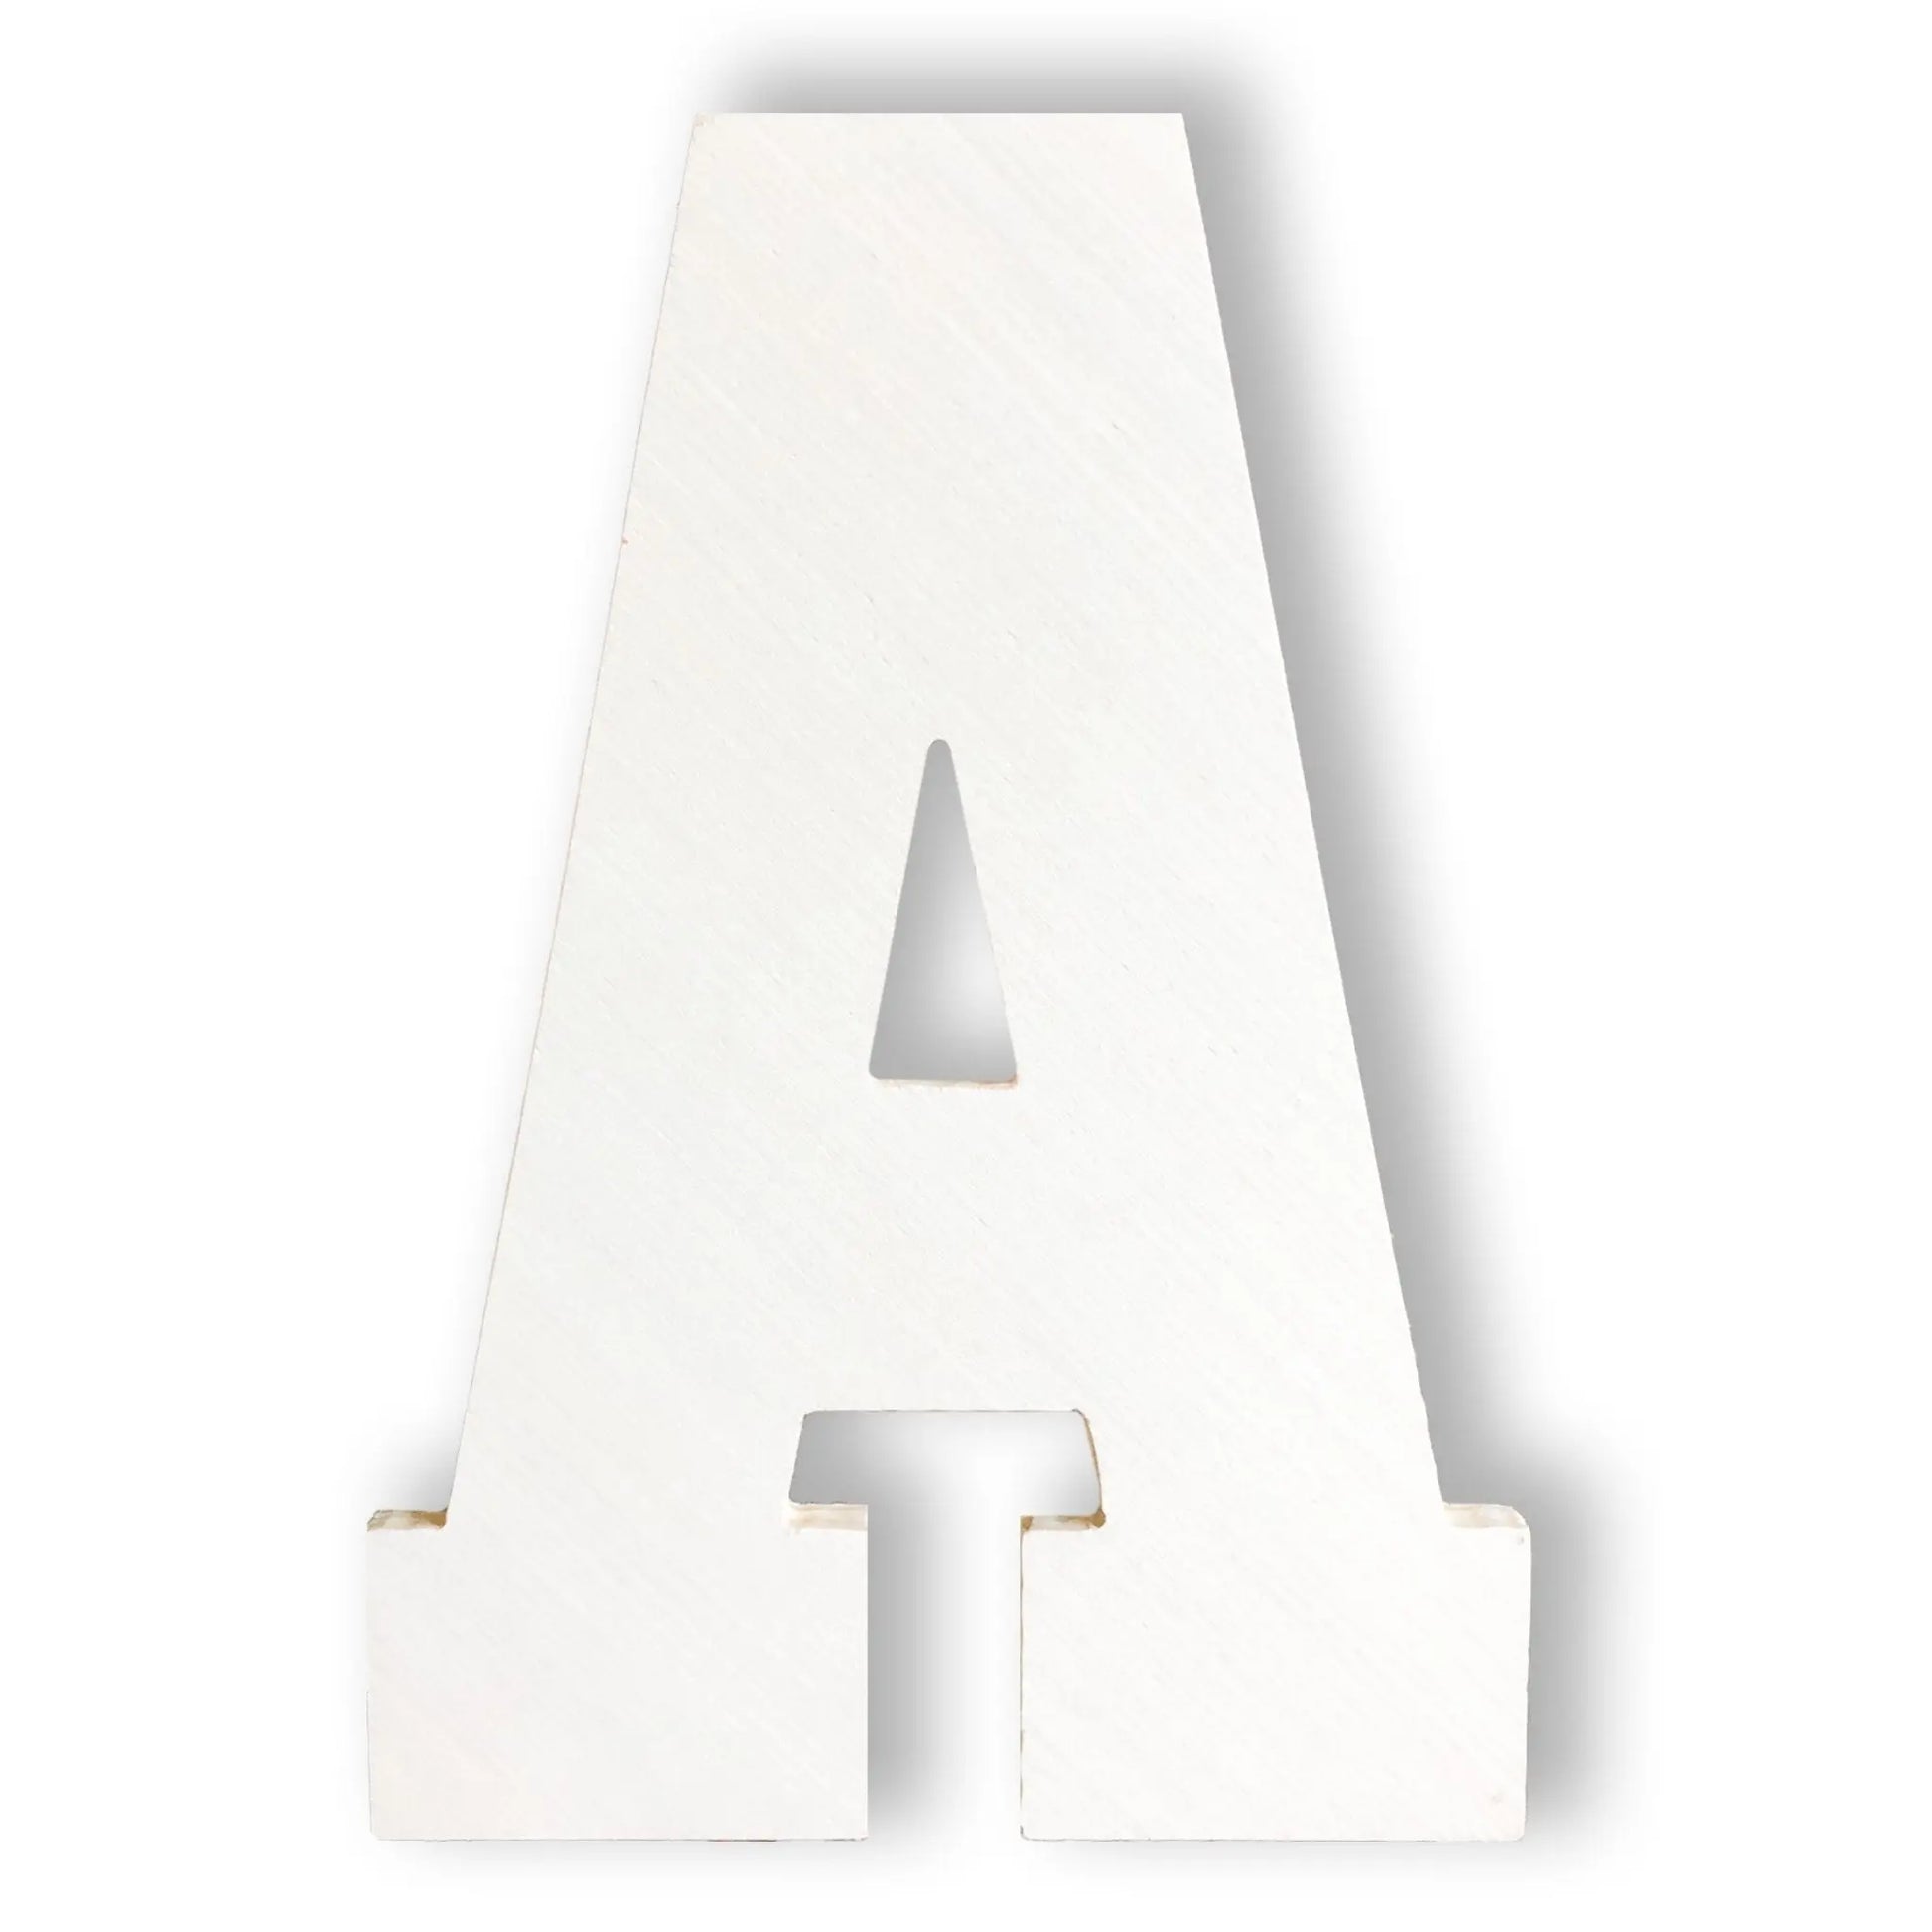 Wooden Letters, Large Letters For Your Next Company Event! Comes with stands! Large Letter A :)